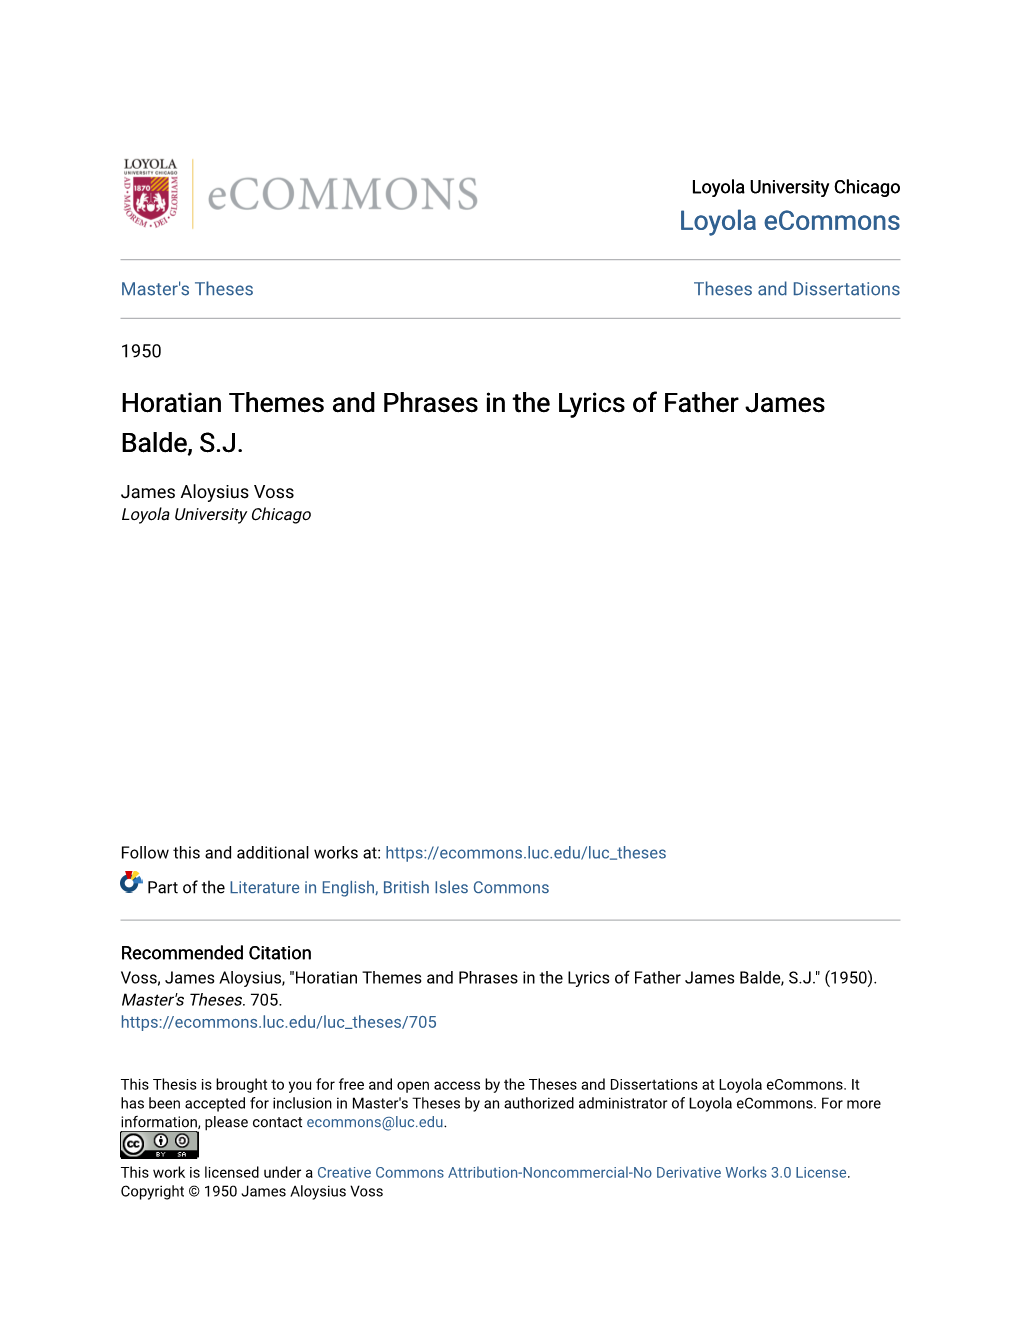 Horatian Themes and Phrases in the Lyrics of Father James Balde, S.J